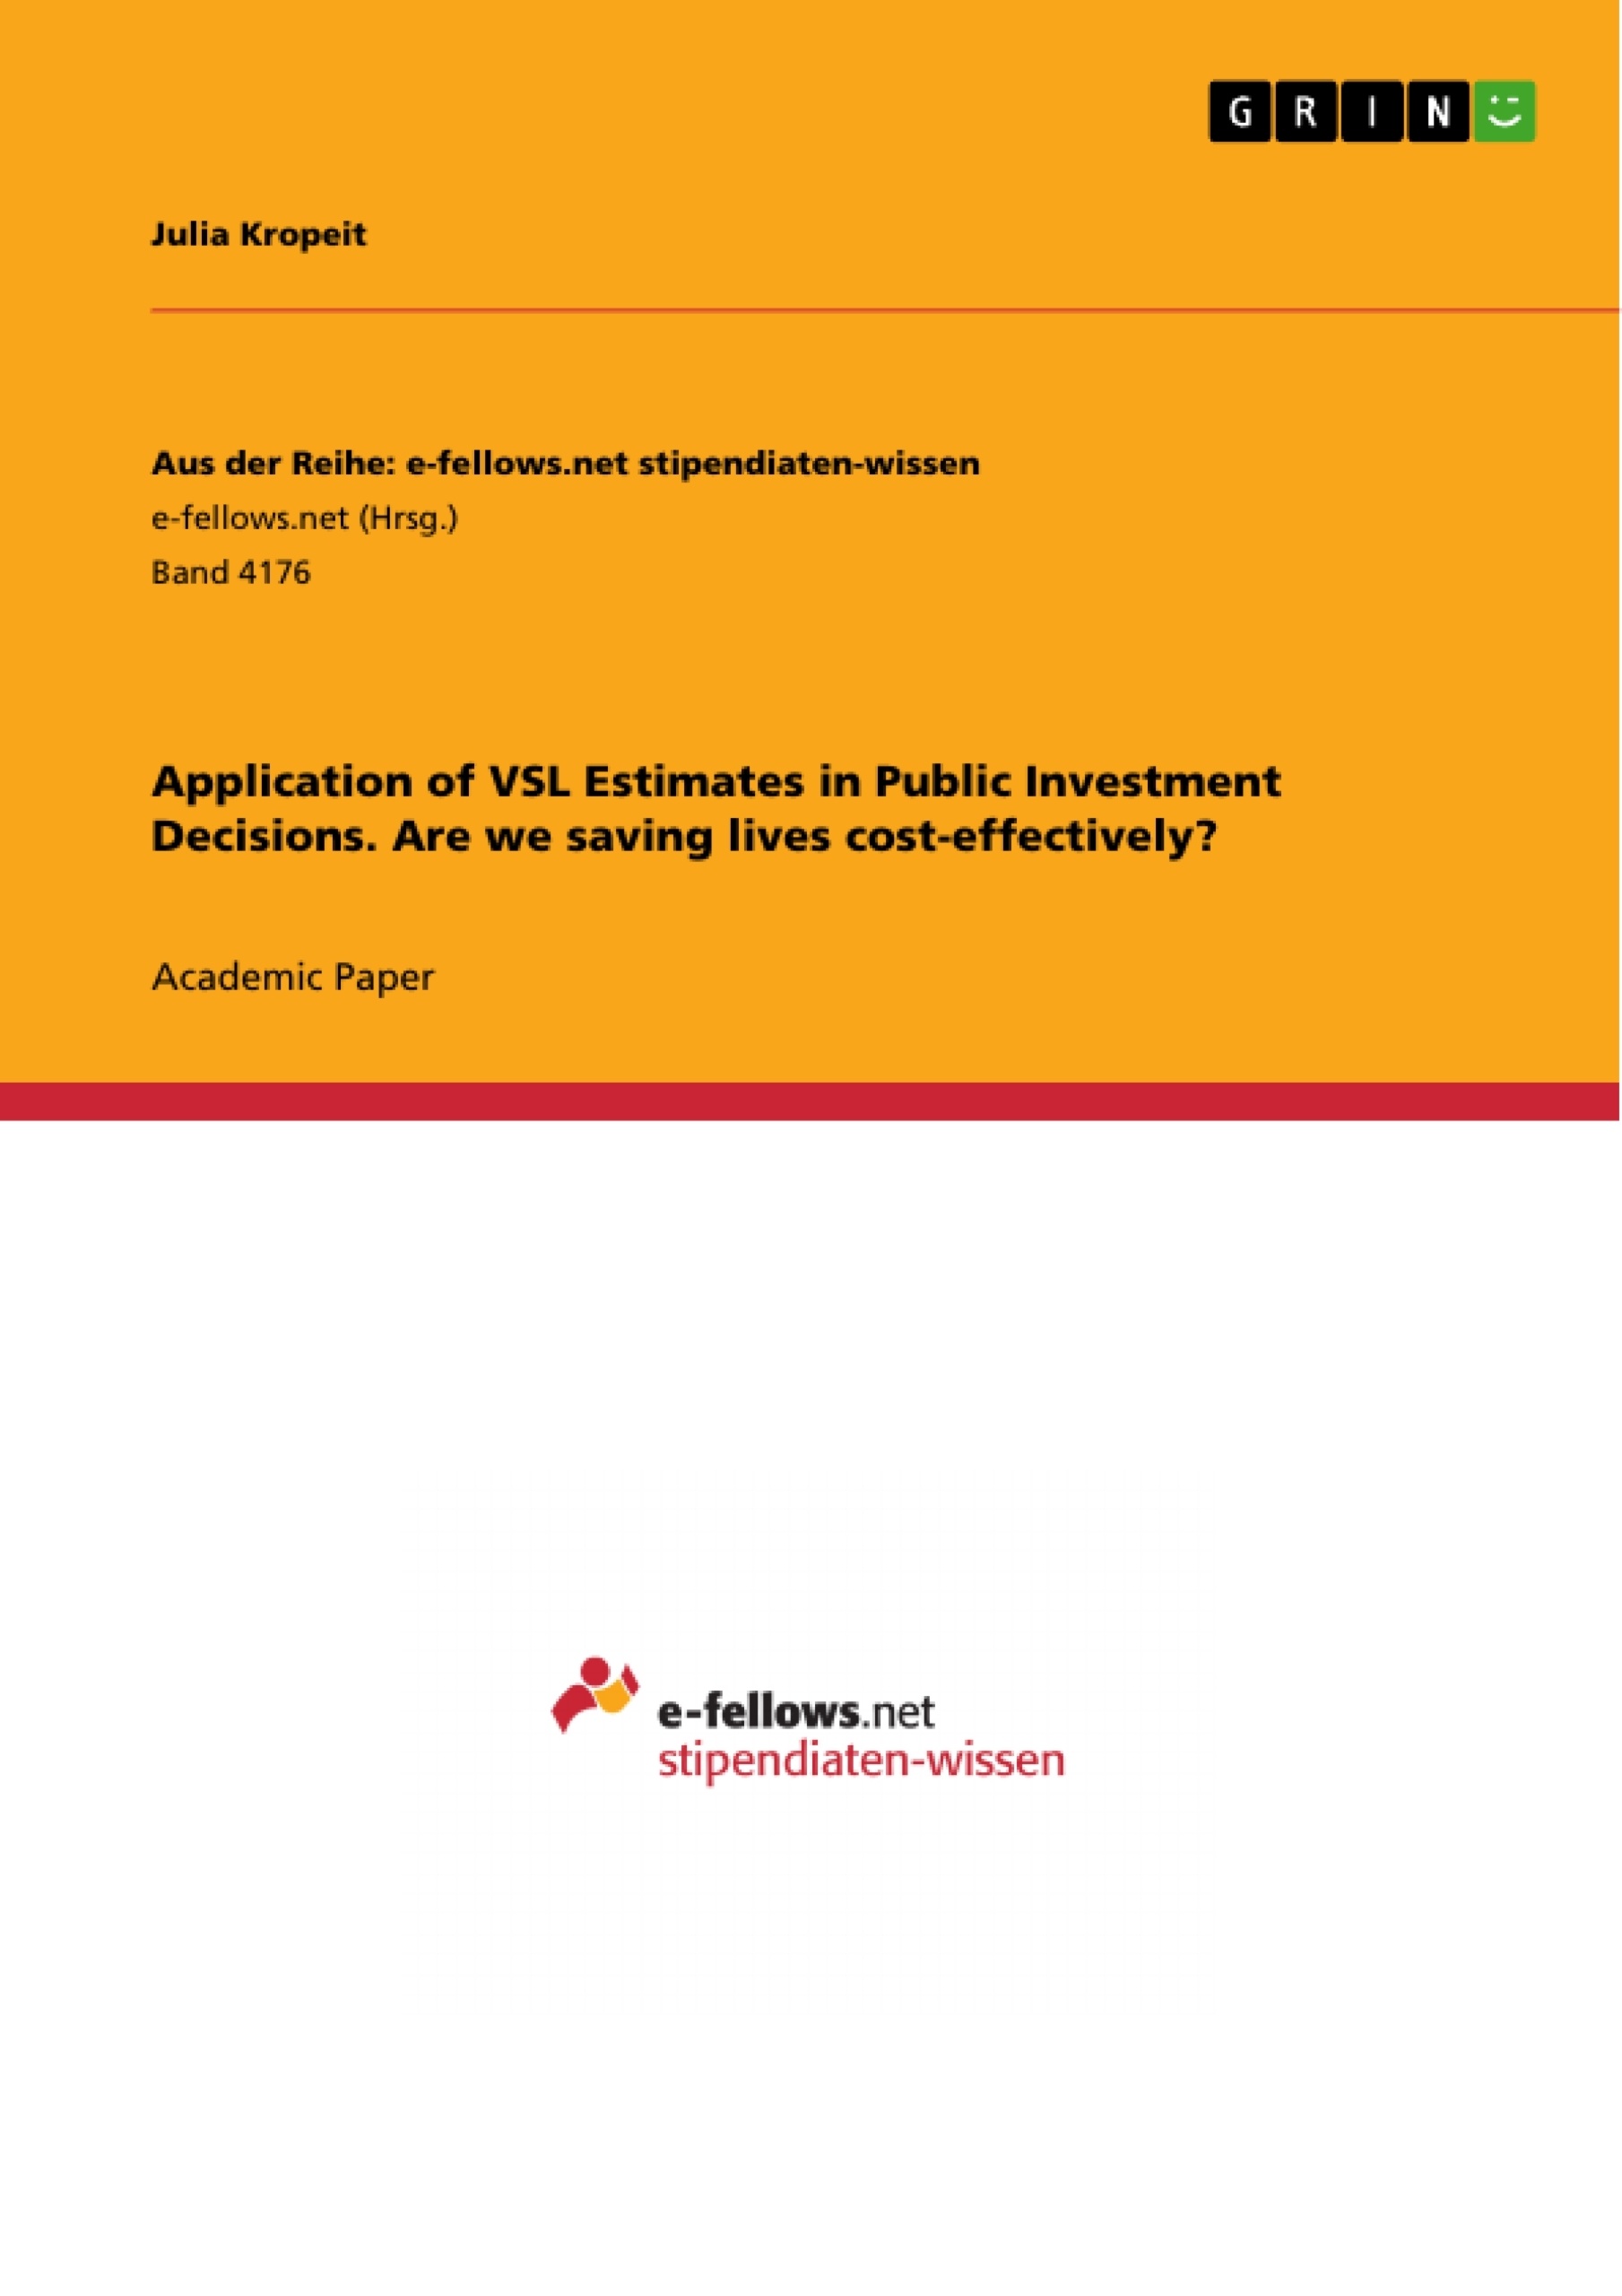 Título: Application of VSL Estimates in Public Investment Decisions. Are we saving lives cost-effectively?